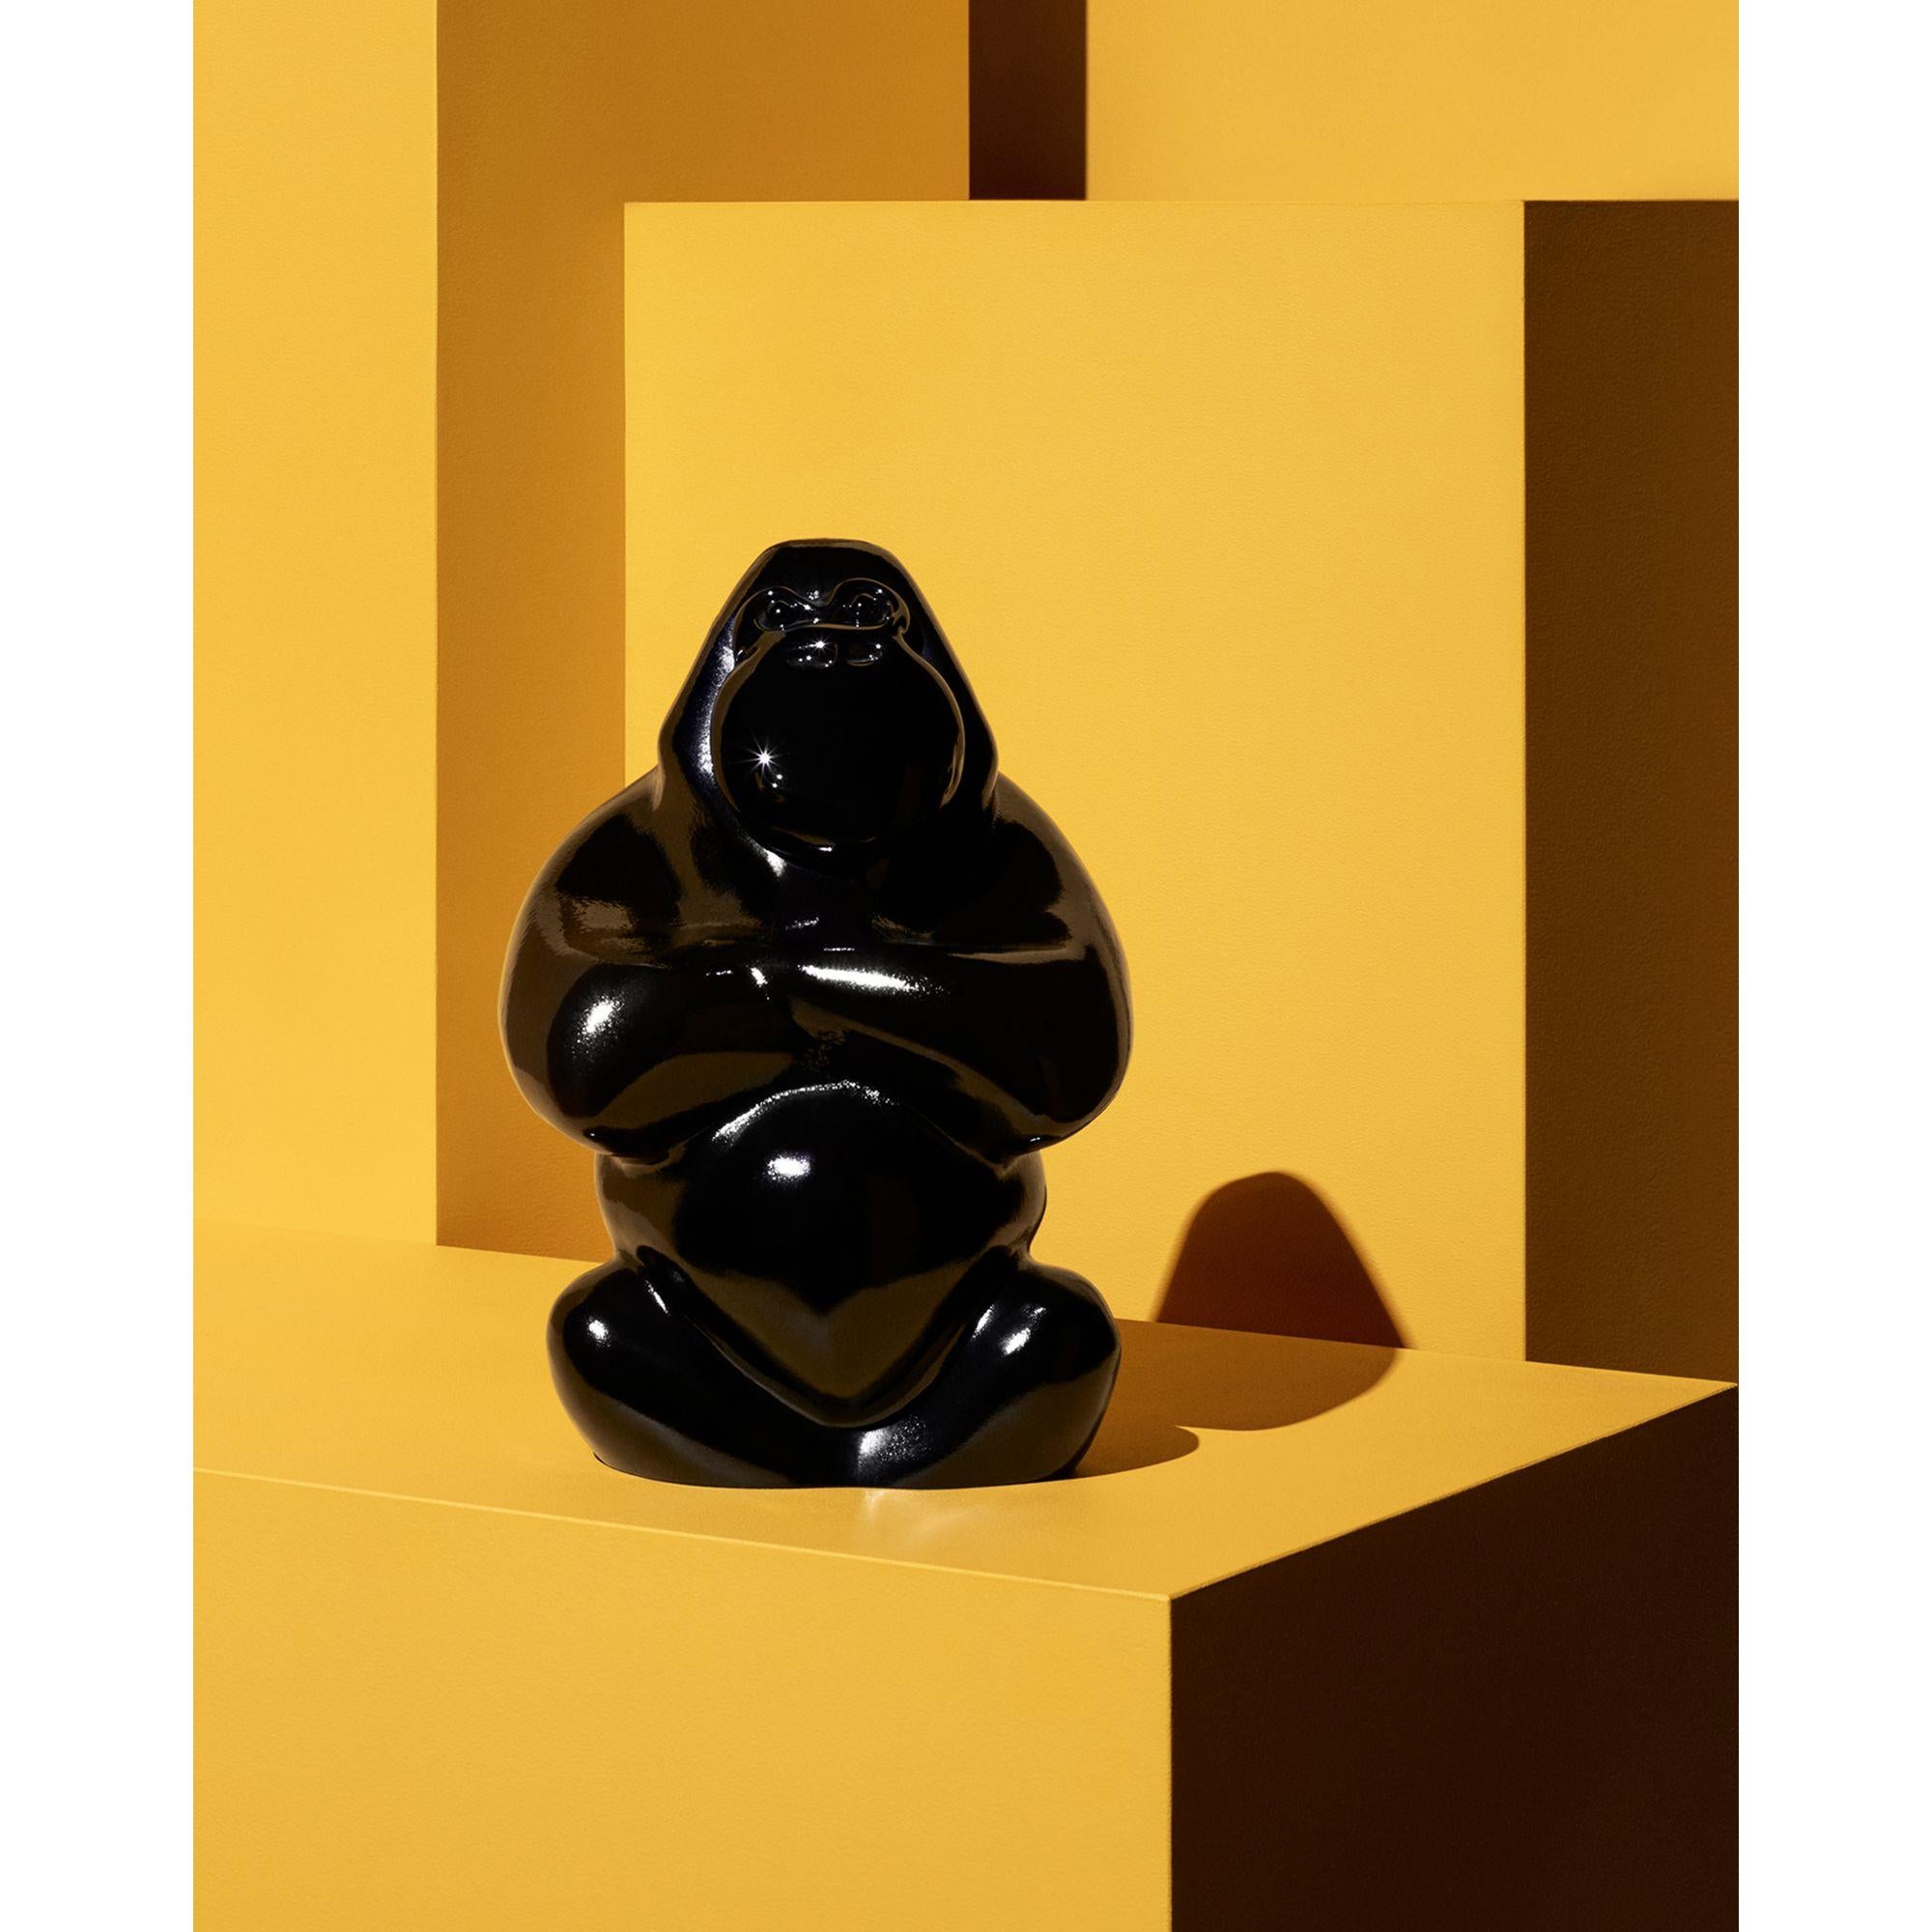 Monkey around? Absolutely! Add vibrancy to your home with this opaque black glass sculpture from Kosta Boda. Despite the black surface, My Wide Life Gabba Gabba Hey is still reflective in all its magnificence. Handmade in Kosta, Sweden. Design by